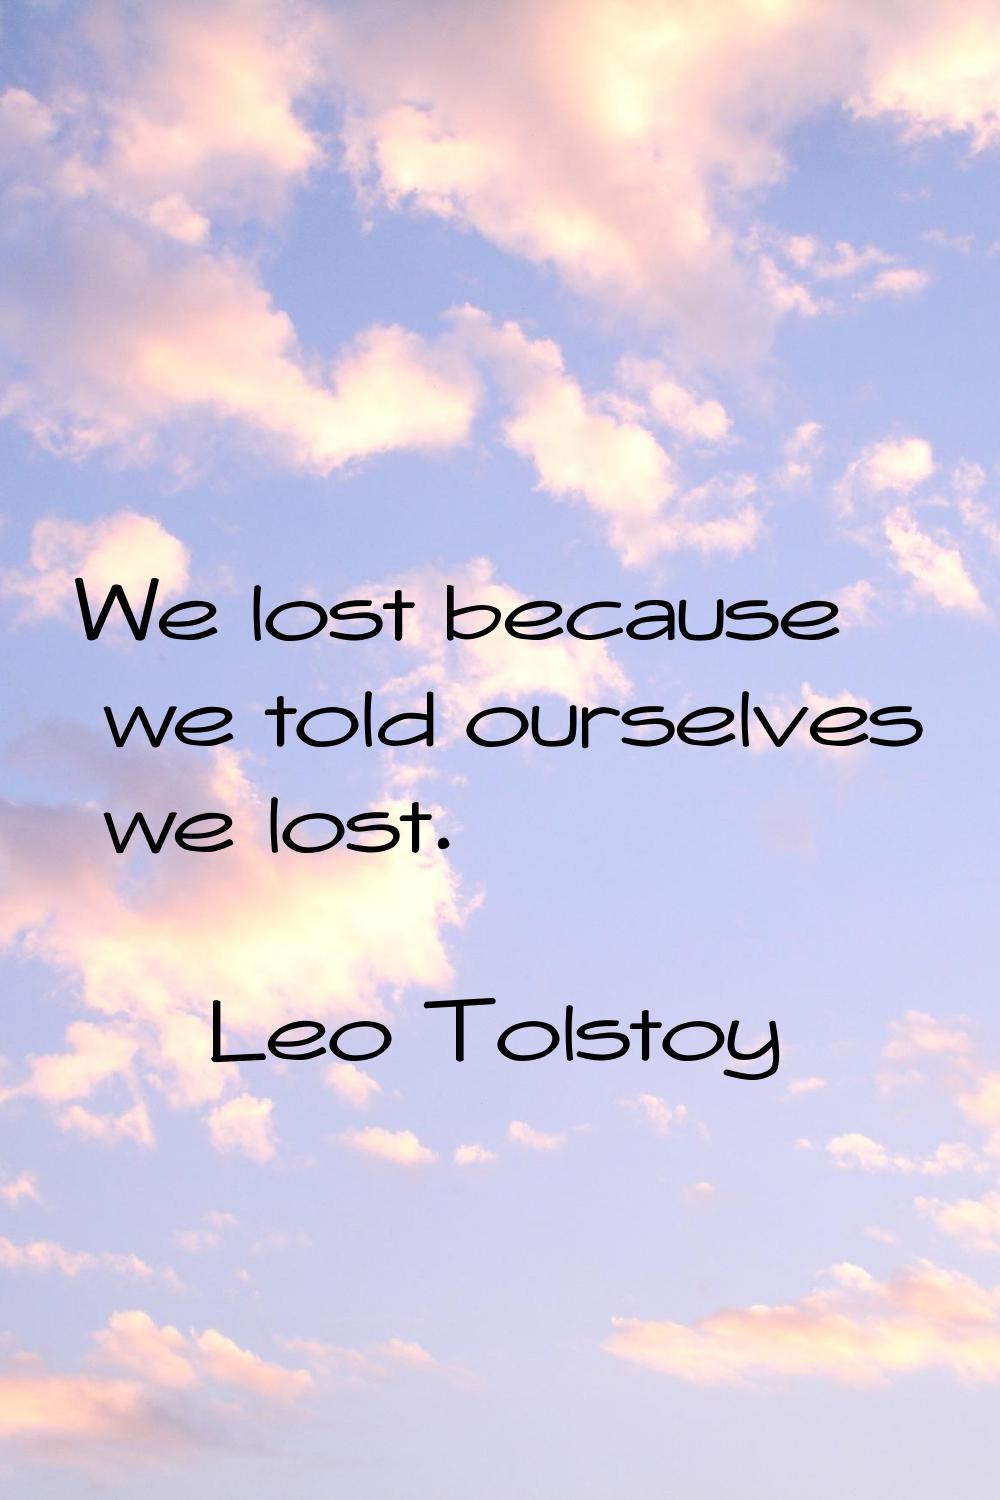 We lost because we told ourselves we lost.